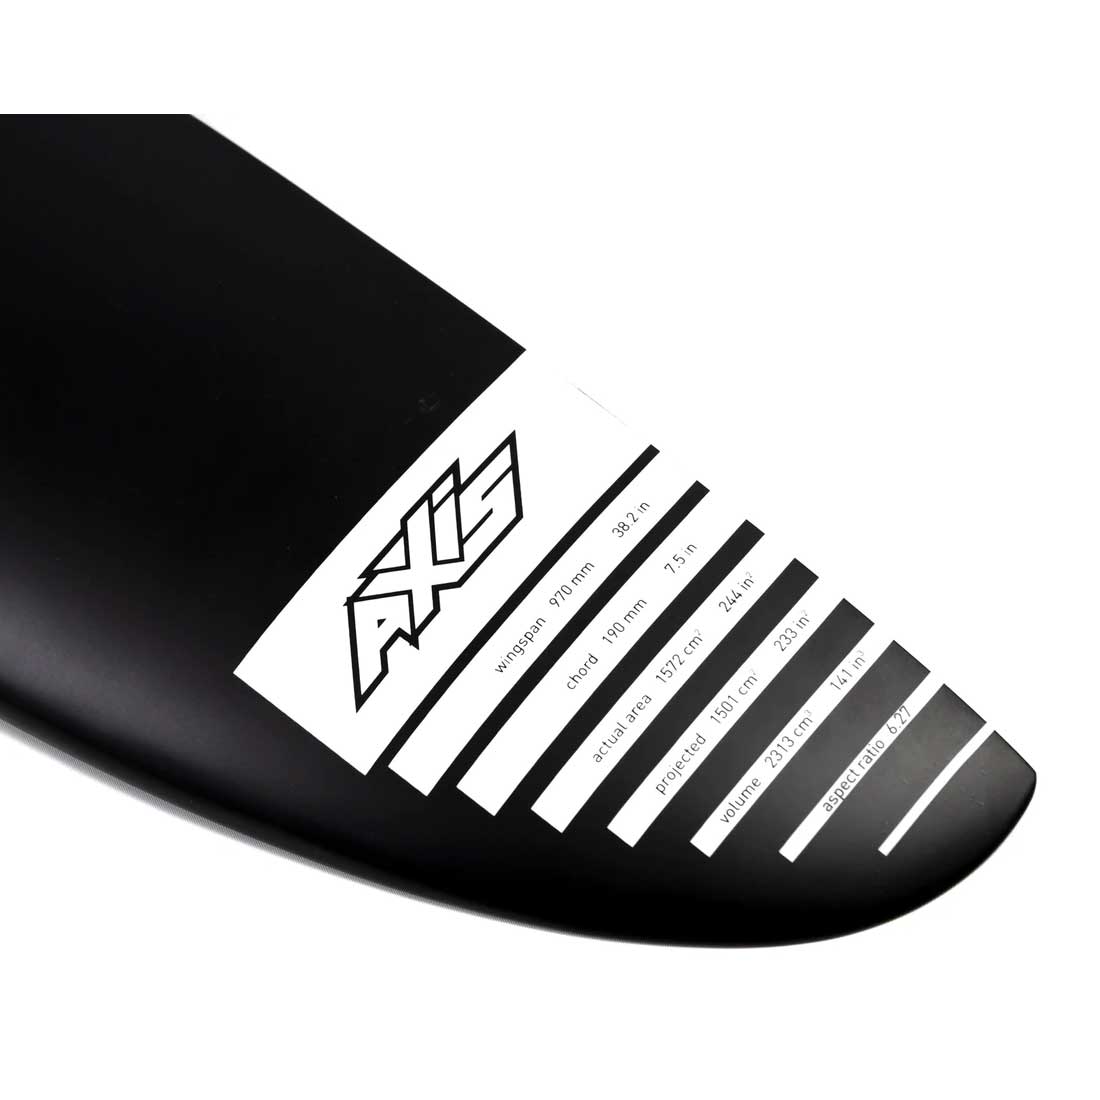 Axis BSC 970 Carbon Hydrofoil Wing - Skymonster Watersports